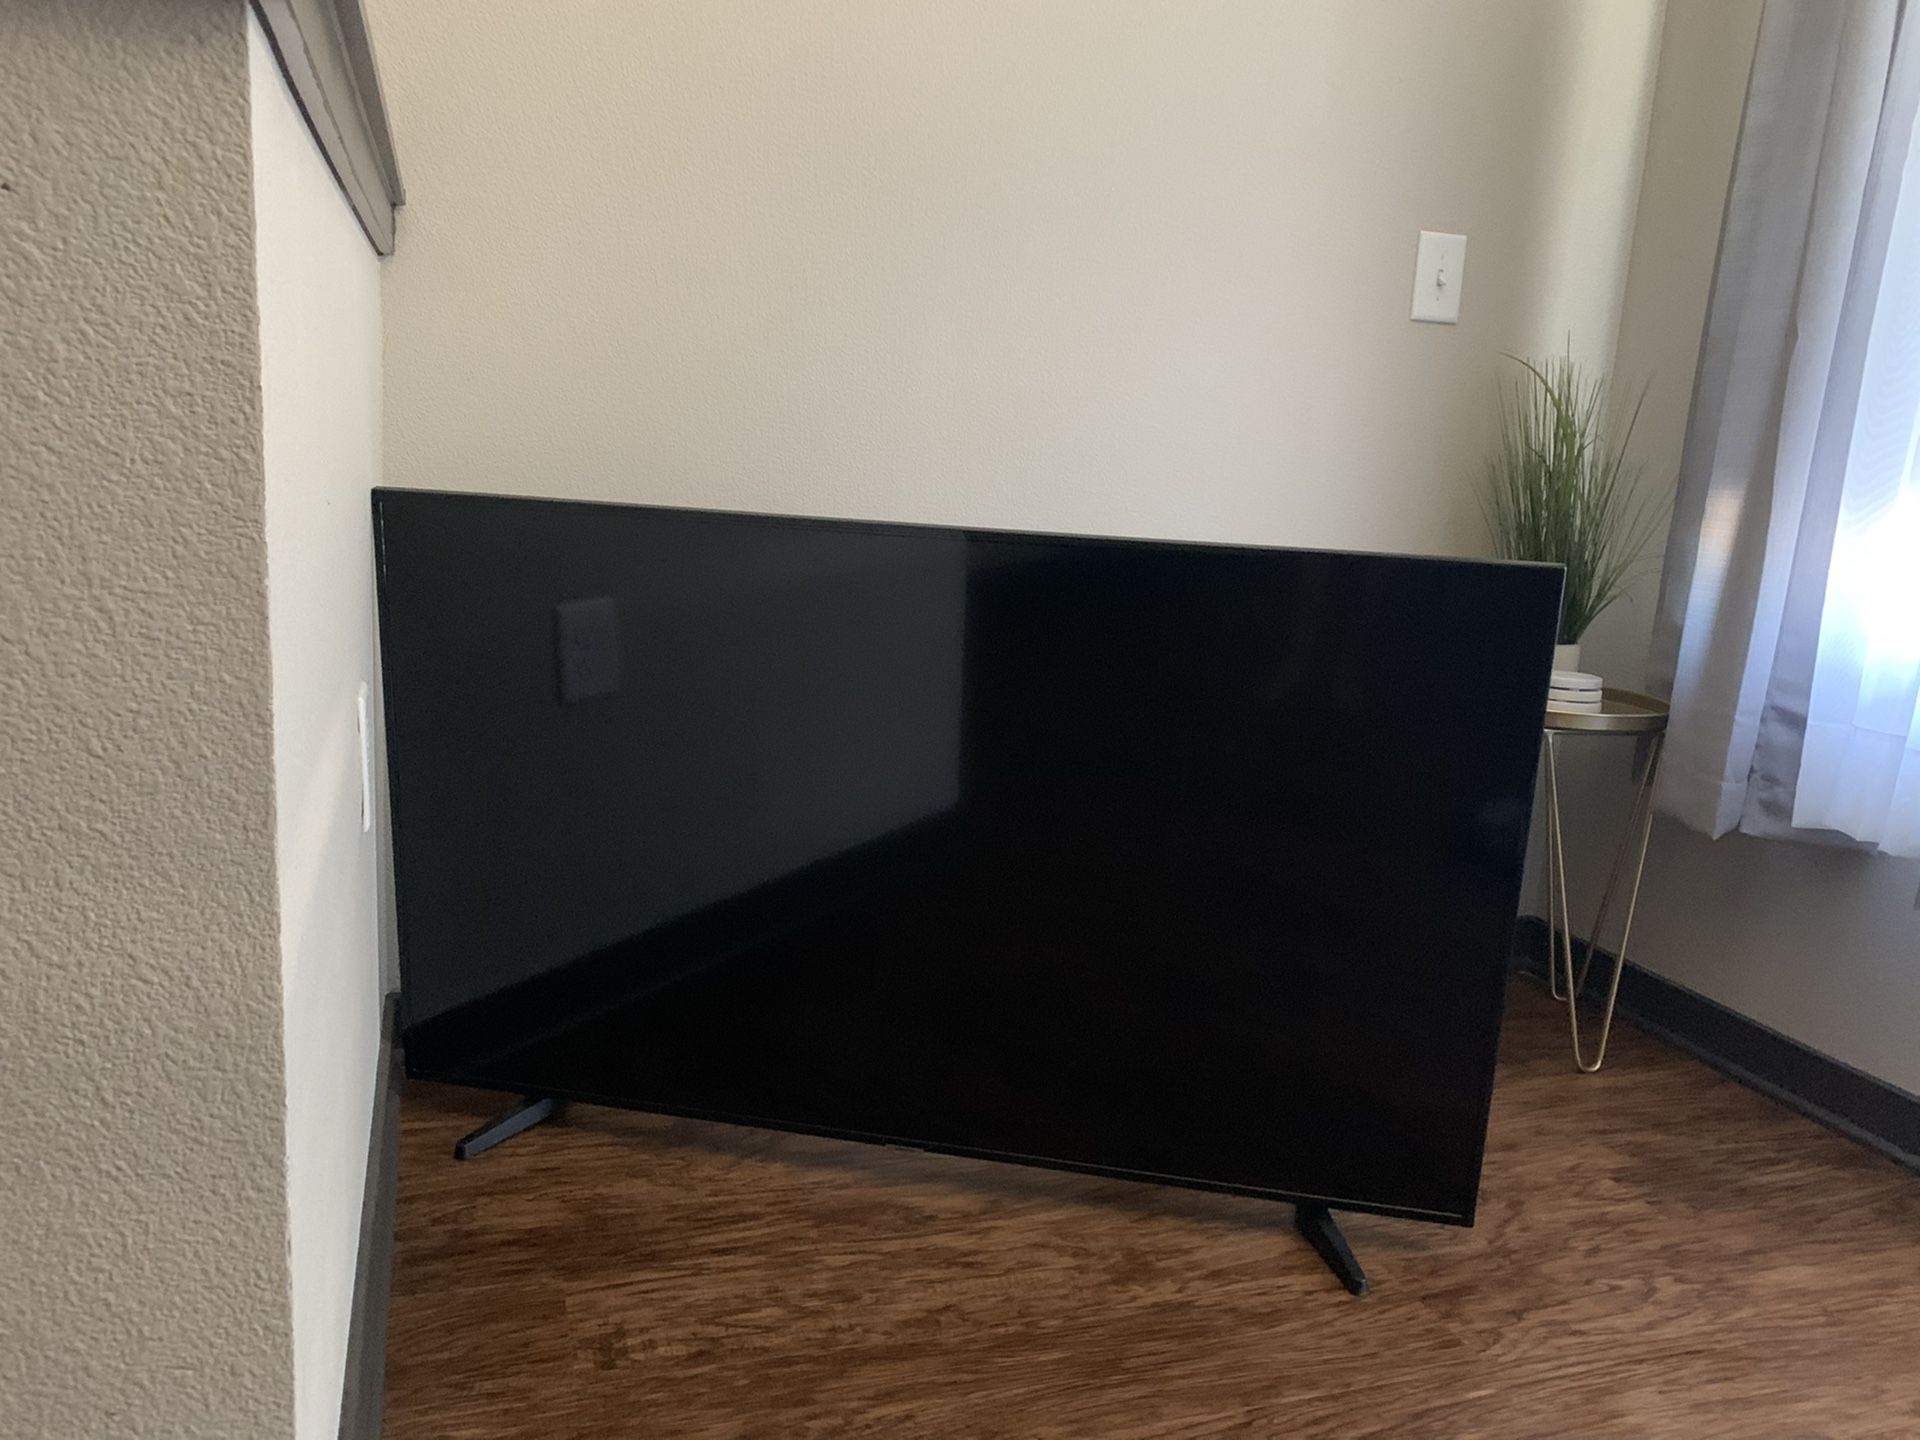 55 inch Samsung 6 series smart television. Price is negotiable